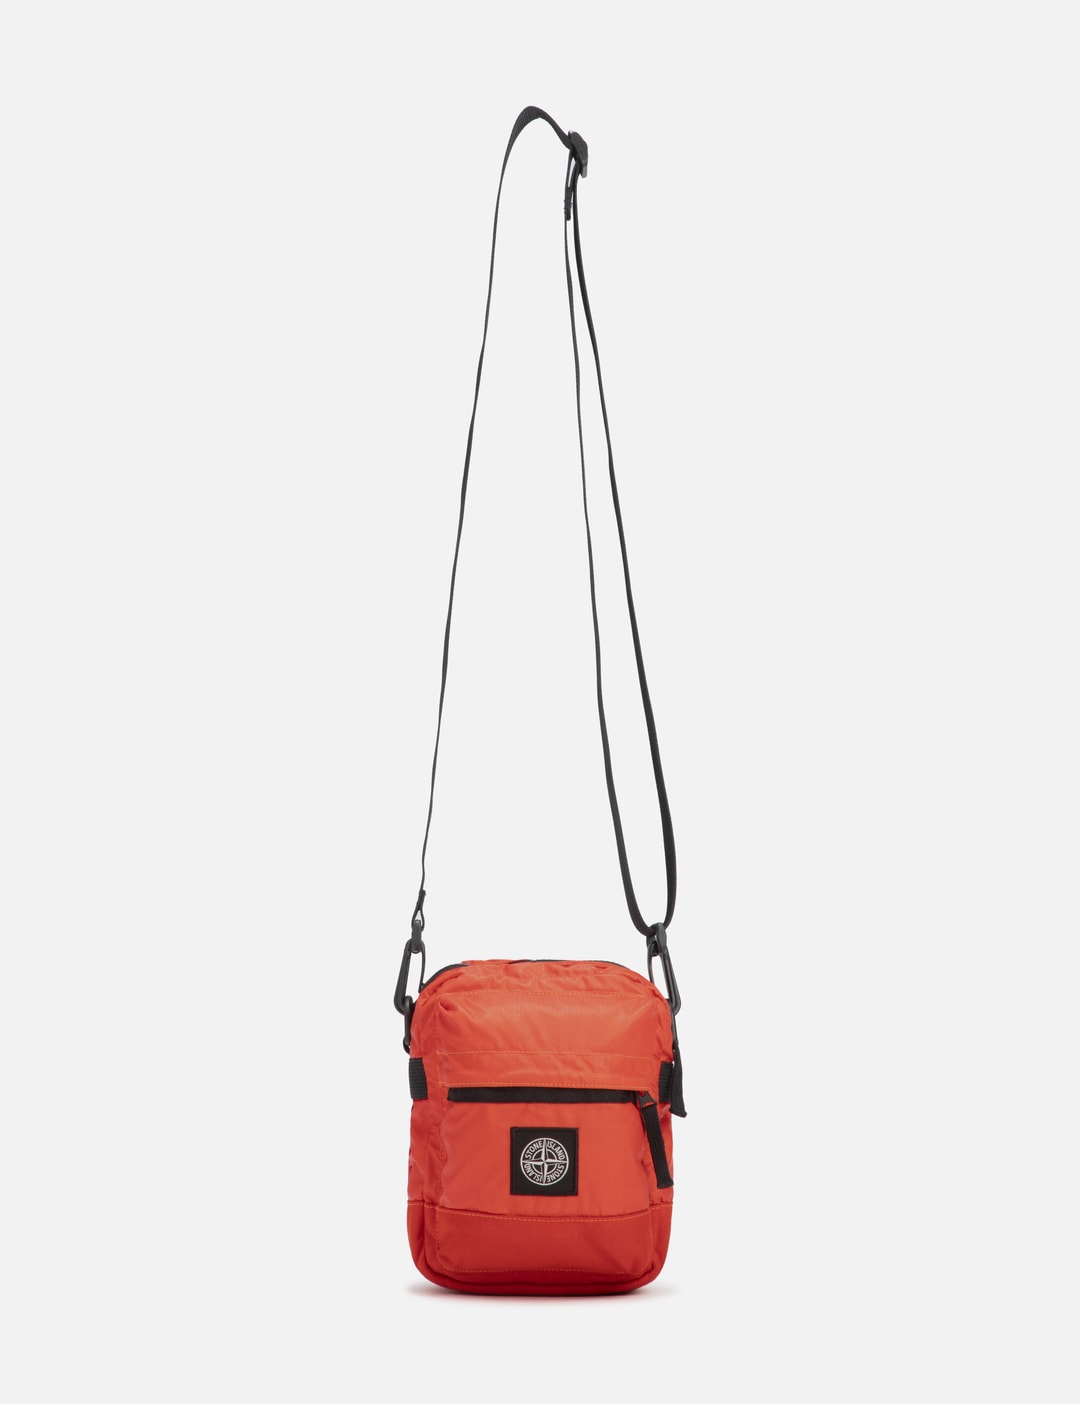 Stone Island - BUM BAG | HBX - Globally Curated Fashion and Lifestyle ...